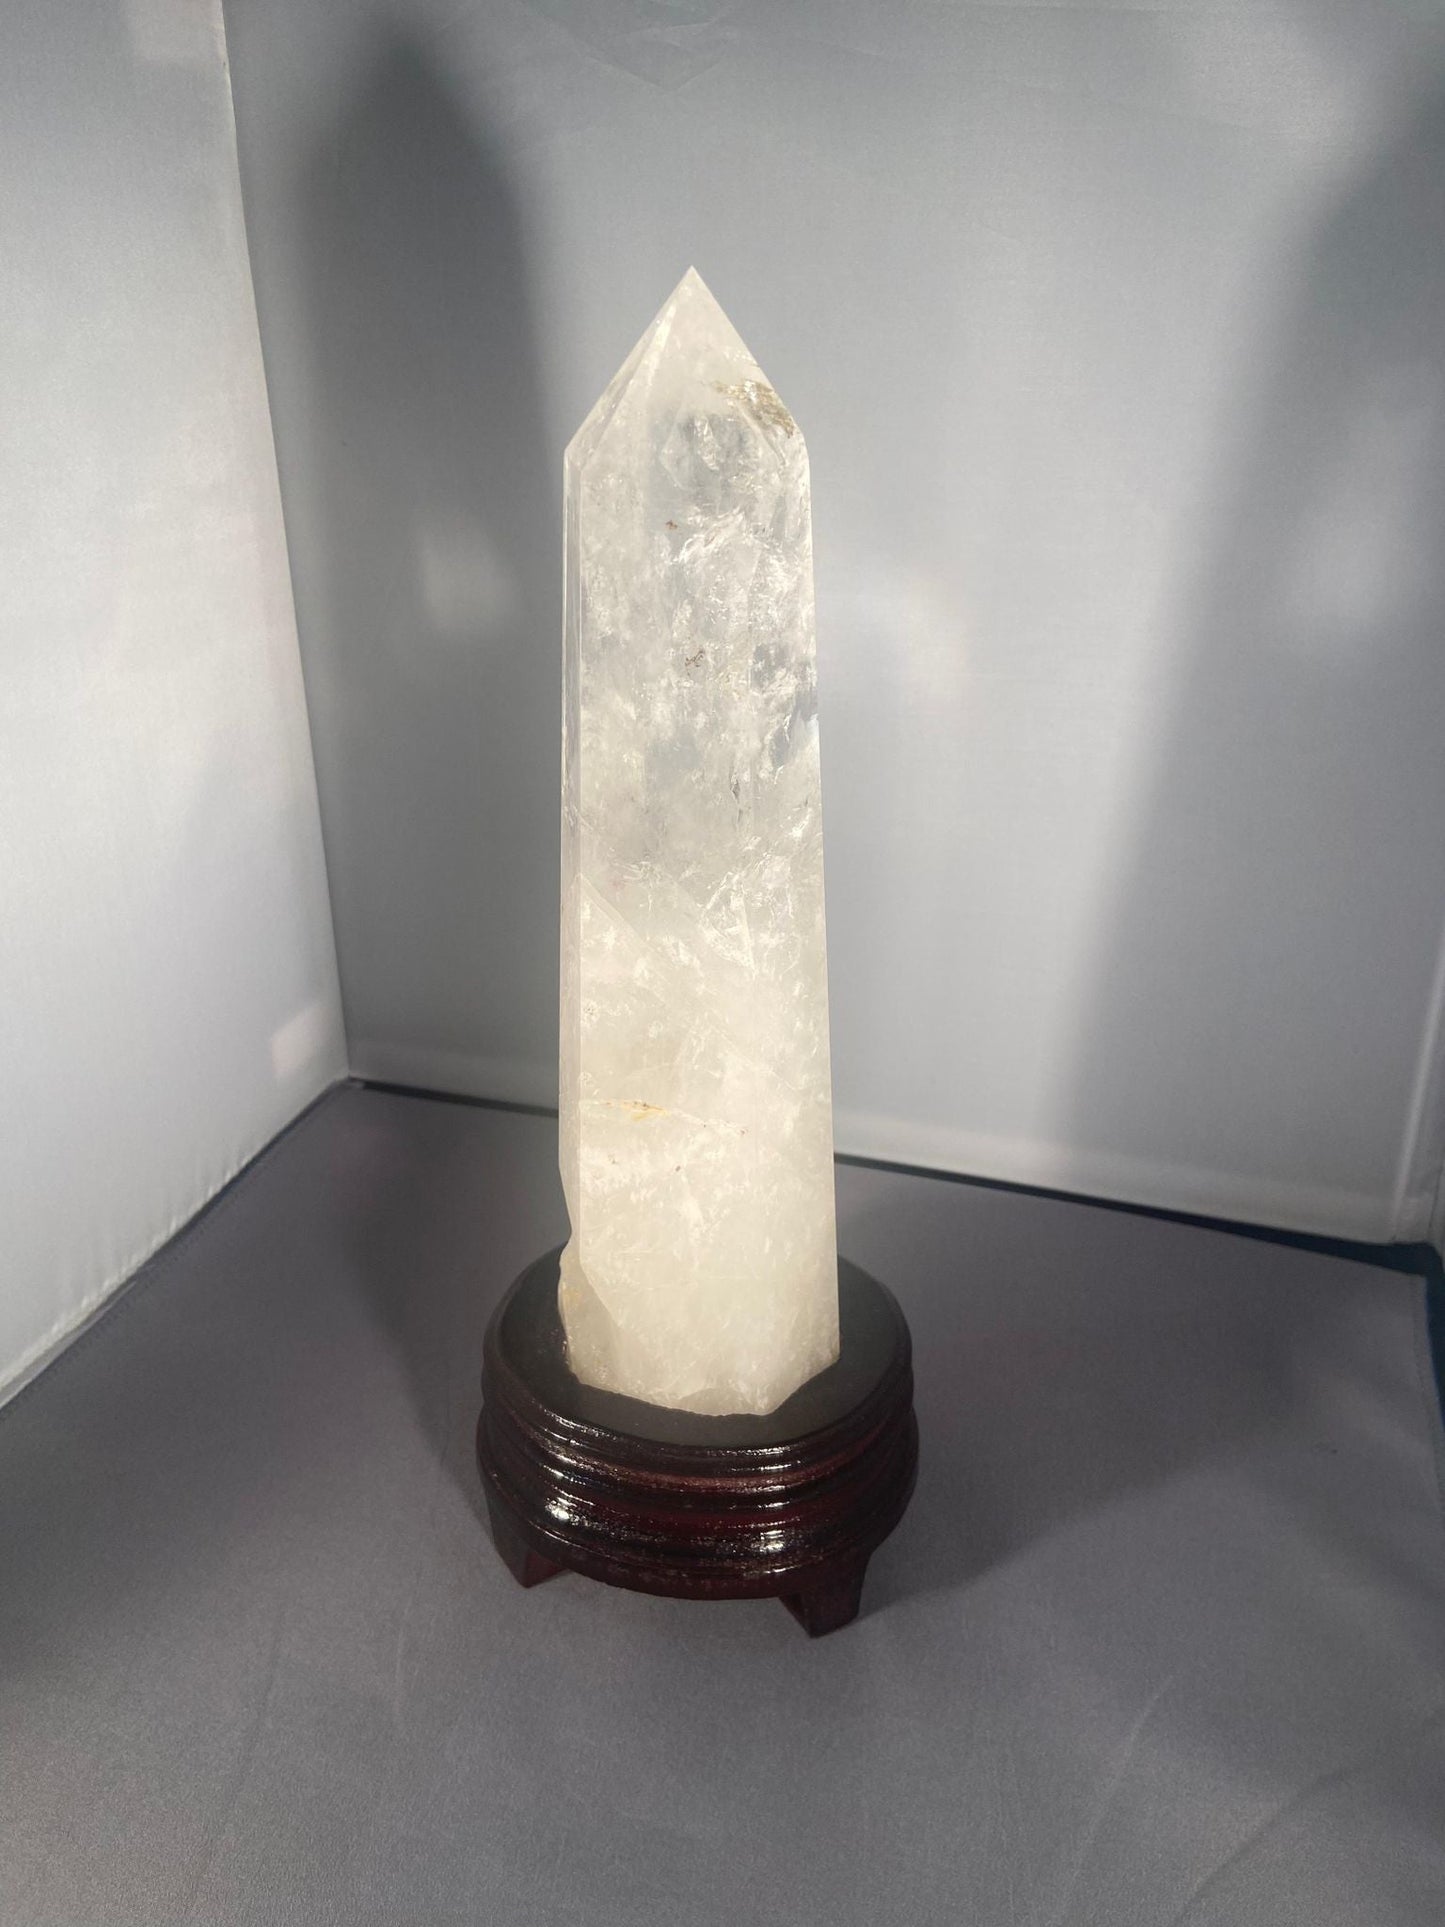 Quartz tower with stand